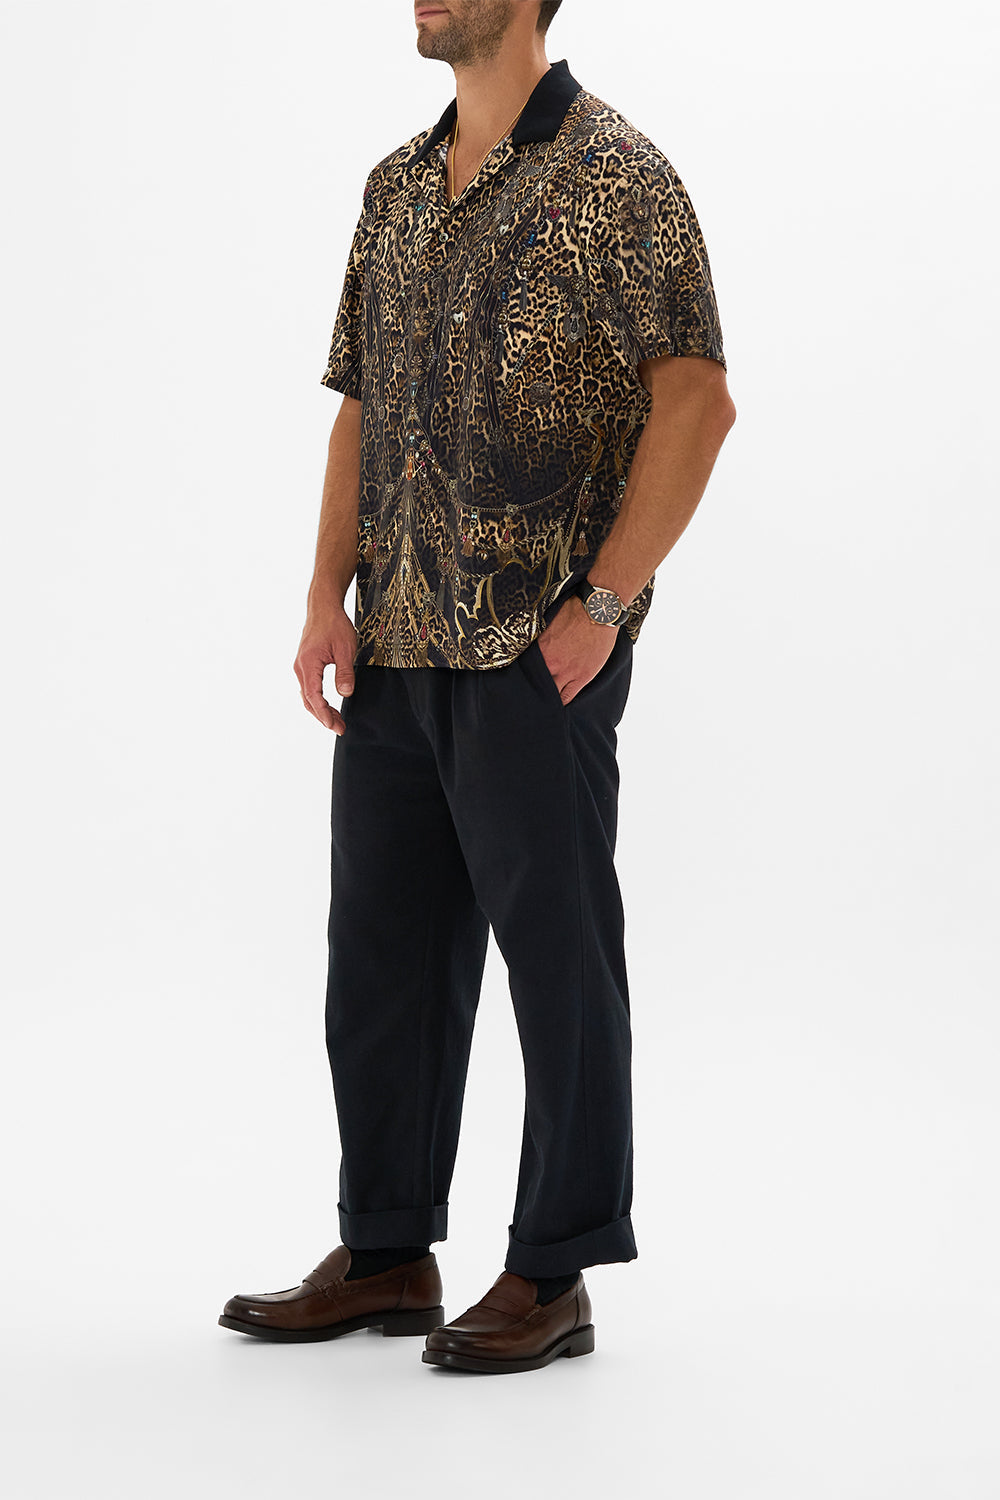 Hotel Franks by CAMILLA leopard relaxed fit woven polo shirt in Amsterglam